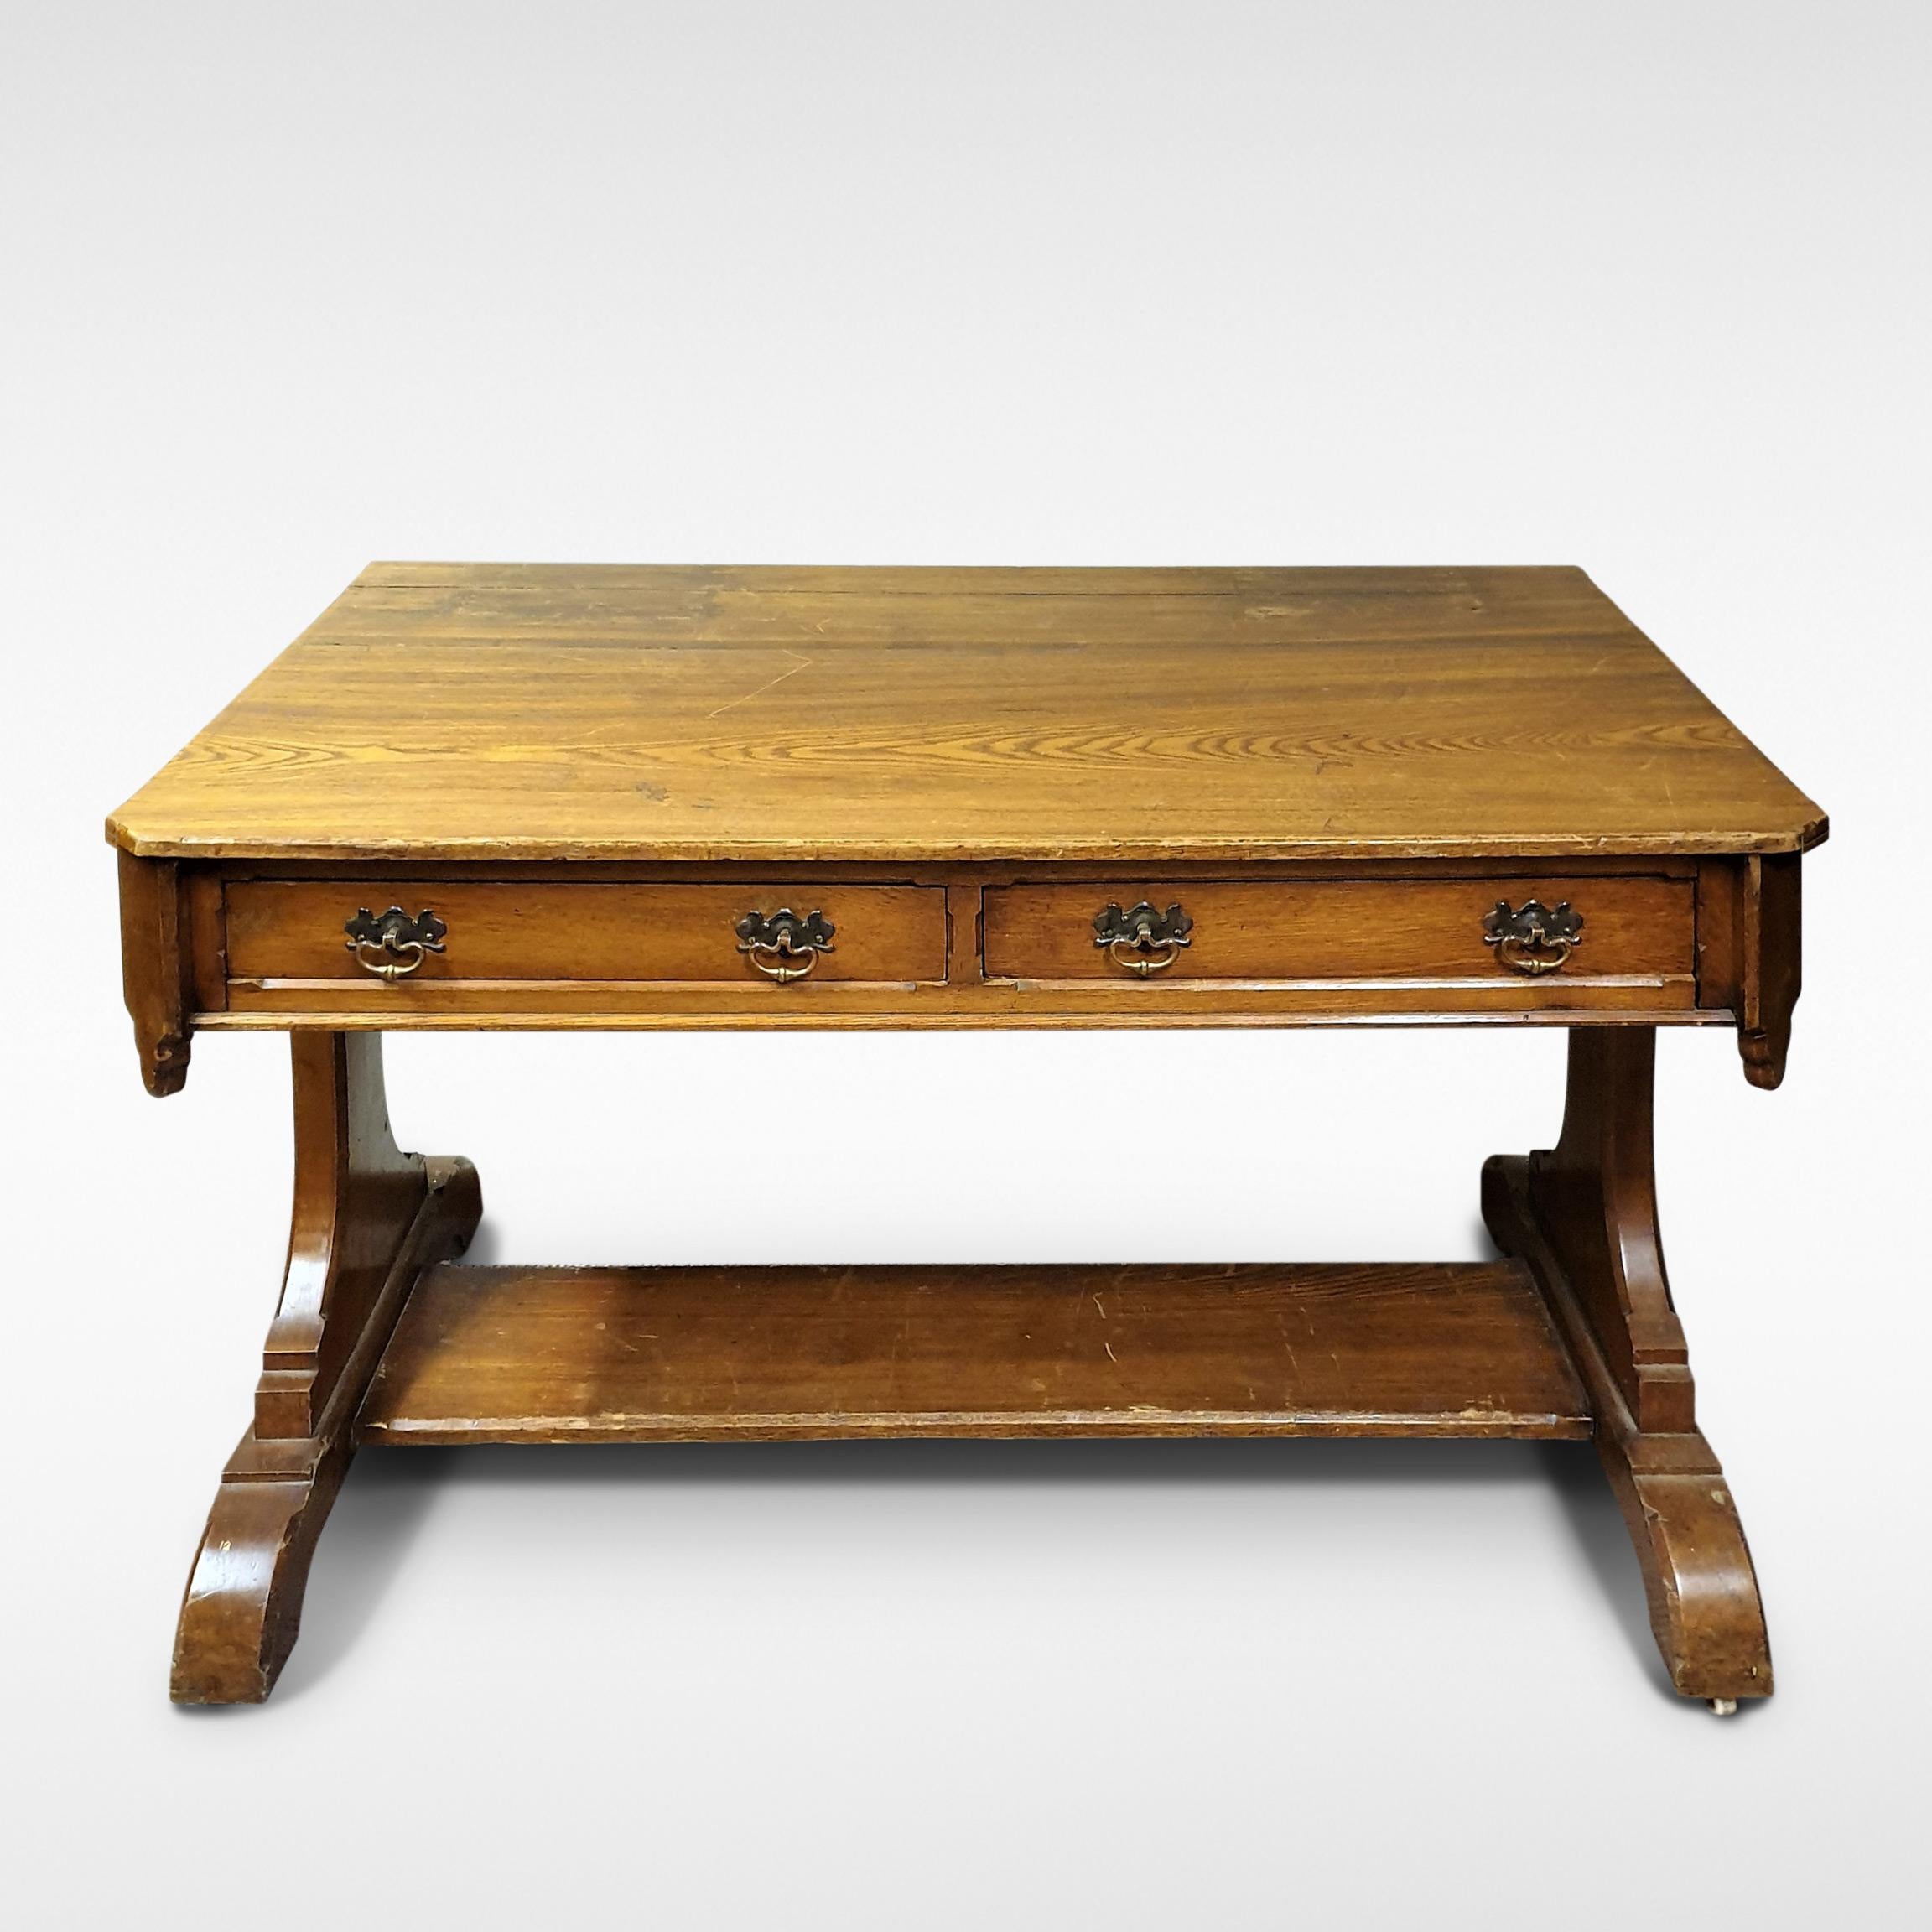 Gothic Revival style Arts & Crafts writing table in pitch pine with trefoil piercings to pedestals, late 19th century

Price includes full restoration using traditional techniques. Please allow 6-8 weeks.